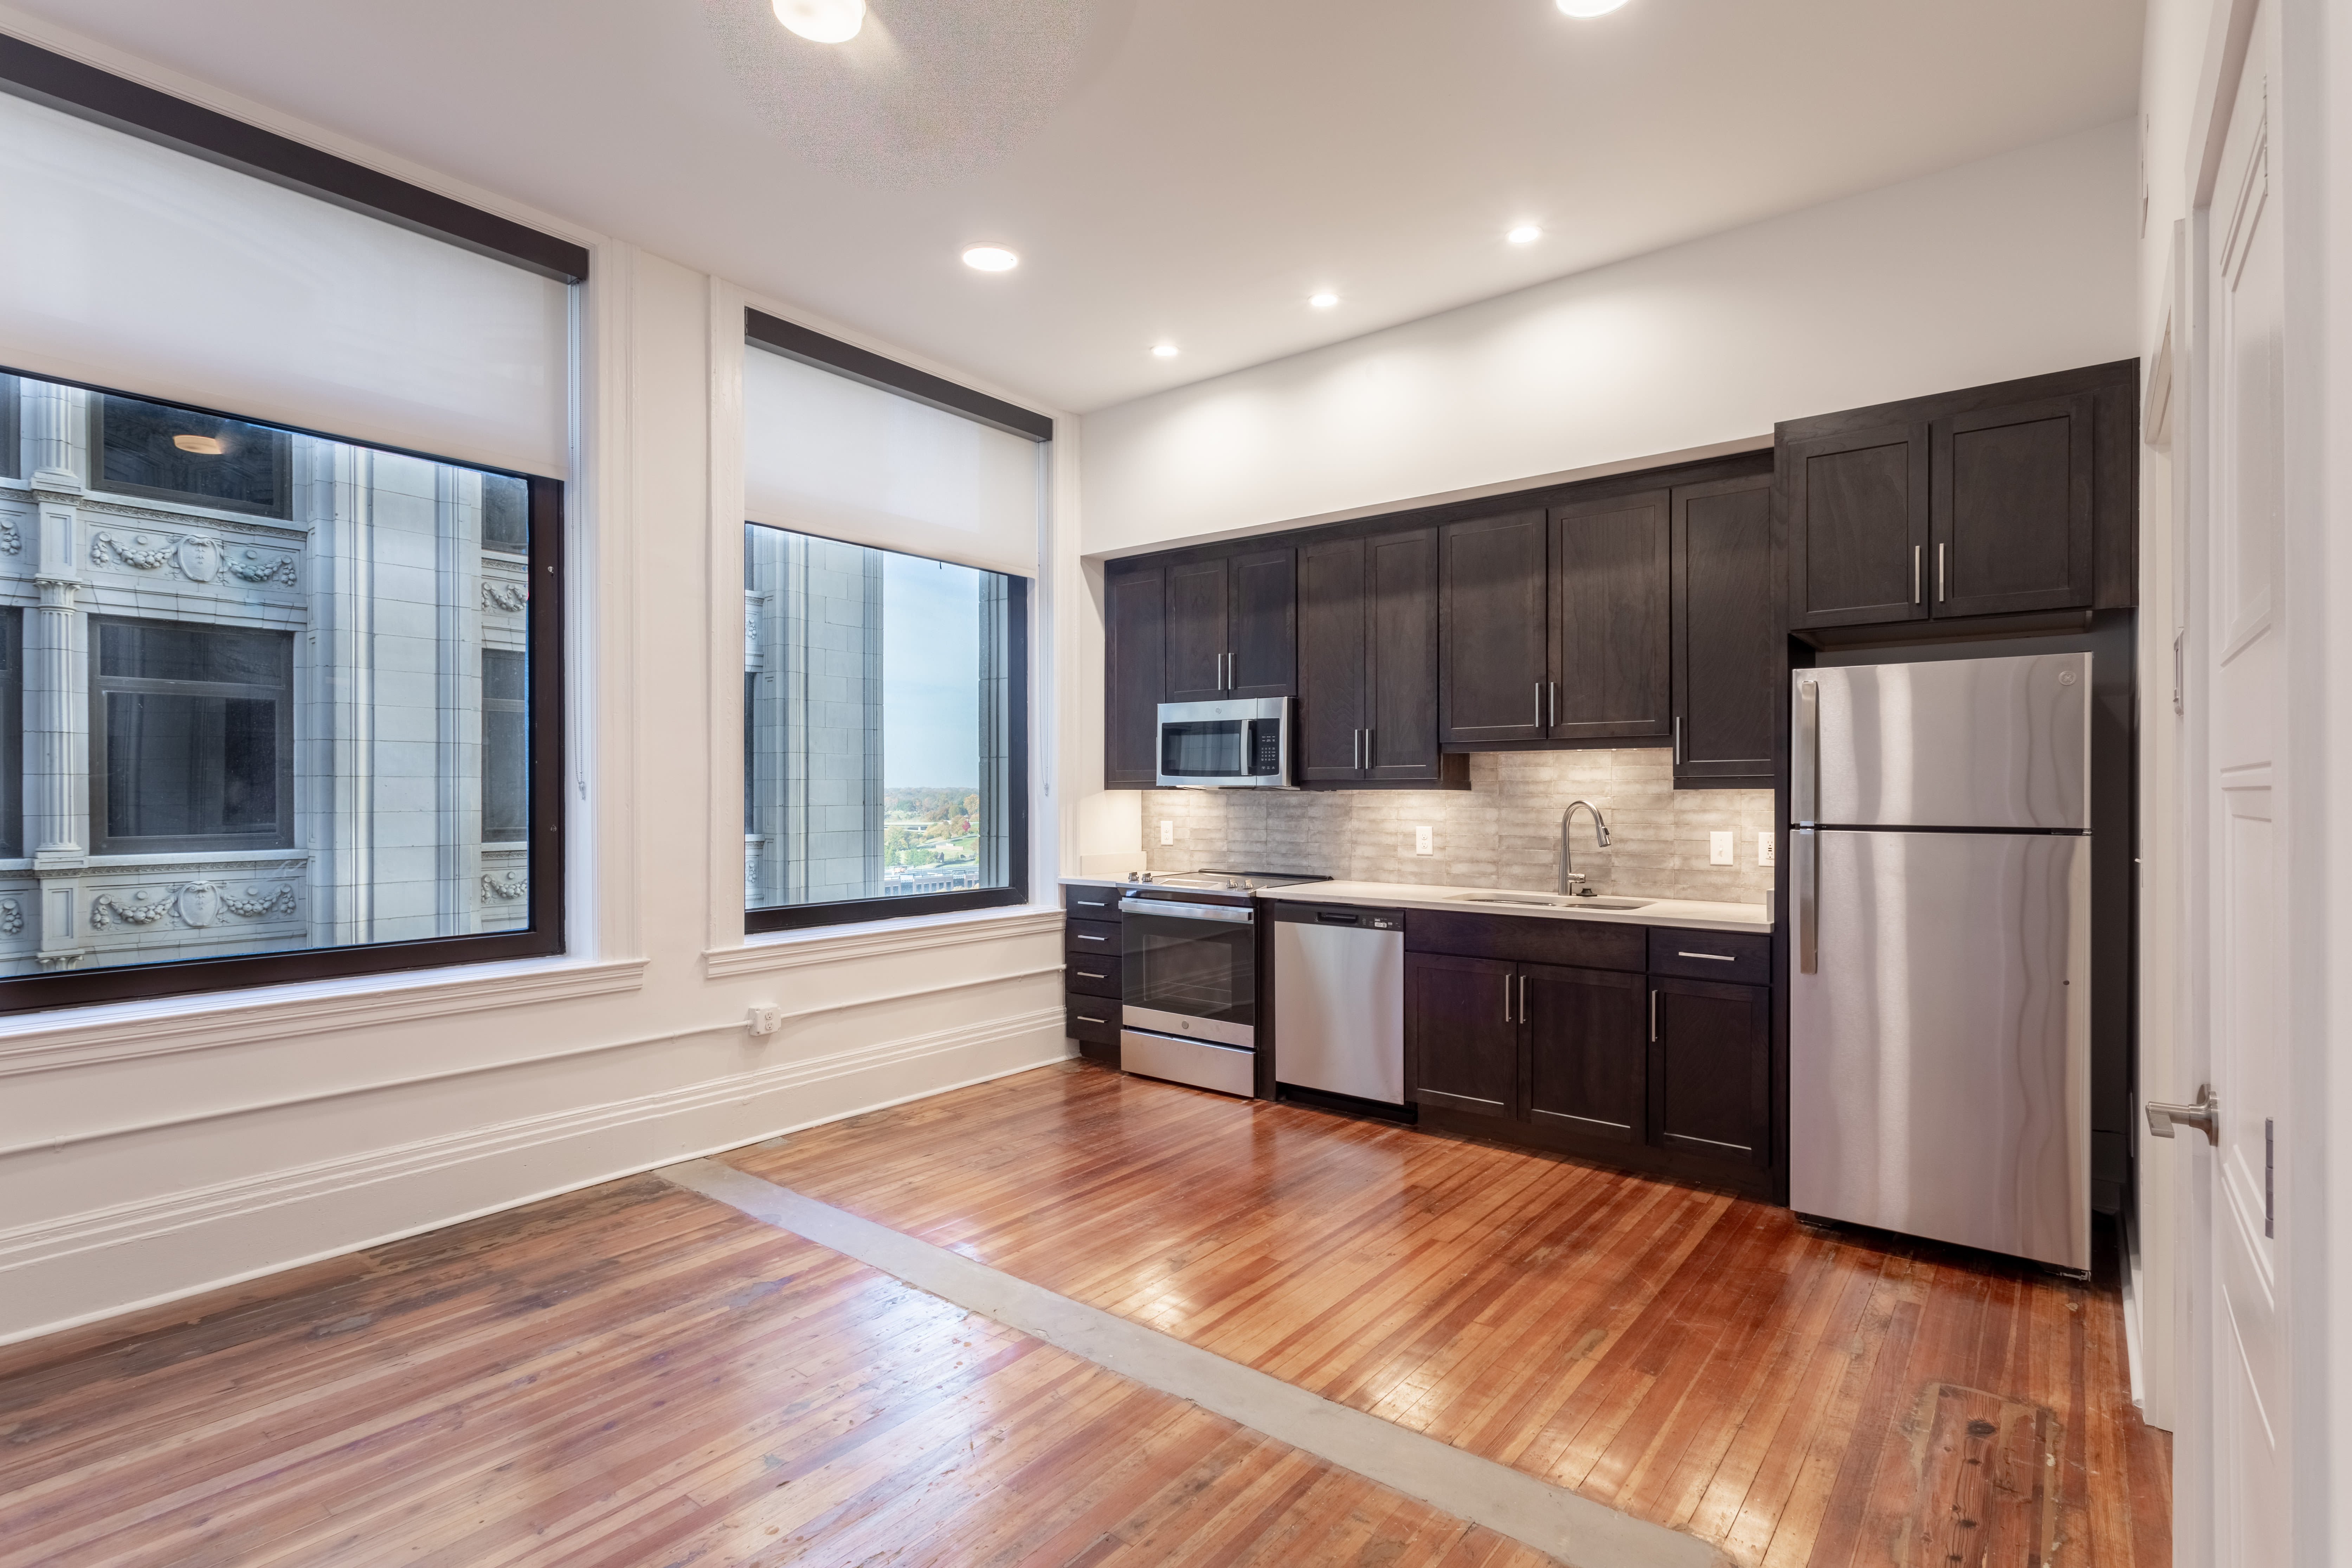 Large windows and stainless-steel appliances in a home at Mutual on Main in Richmond, Virginia